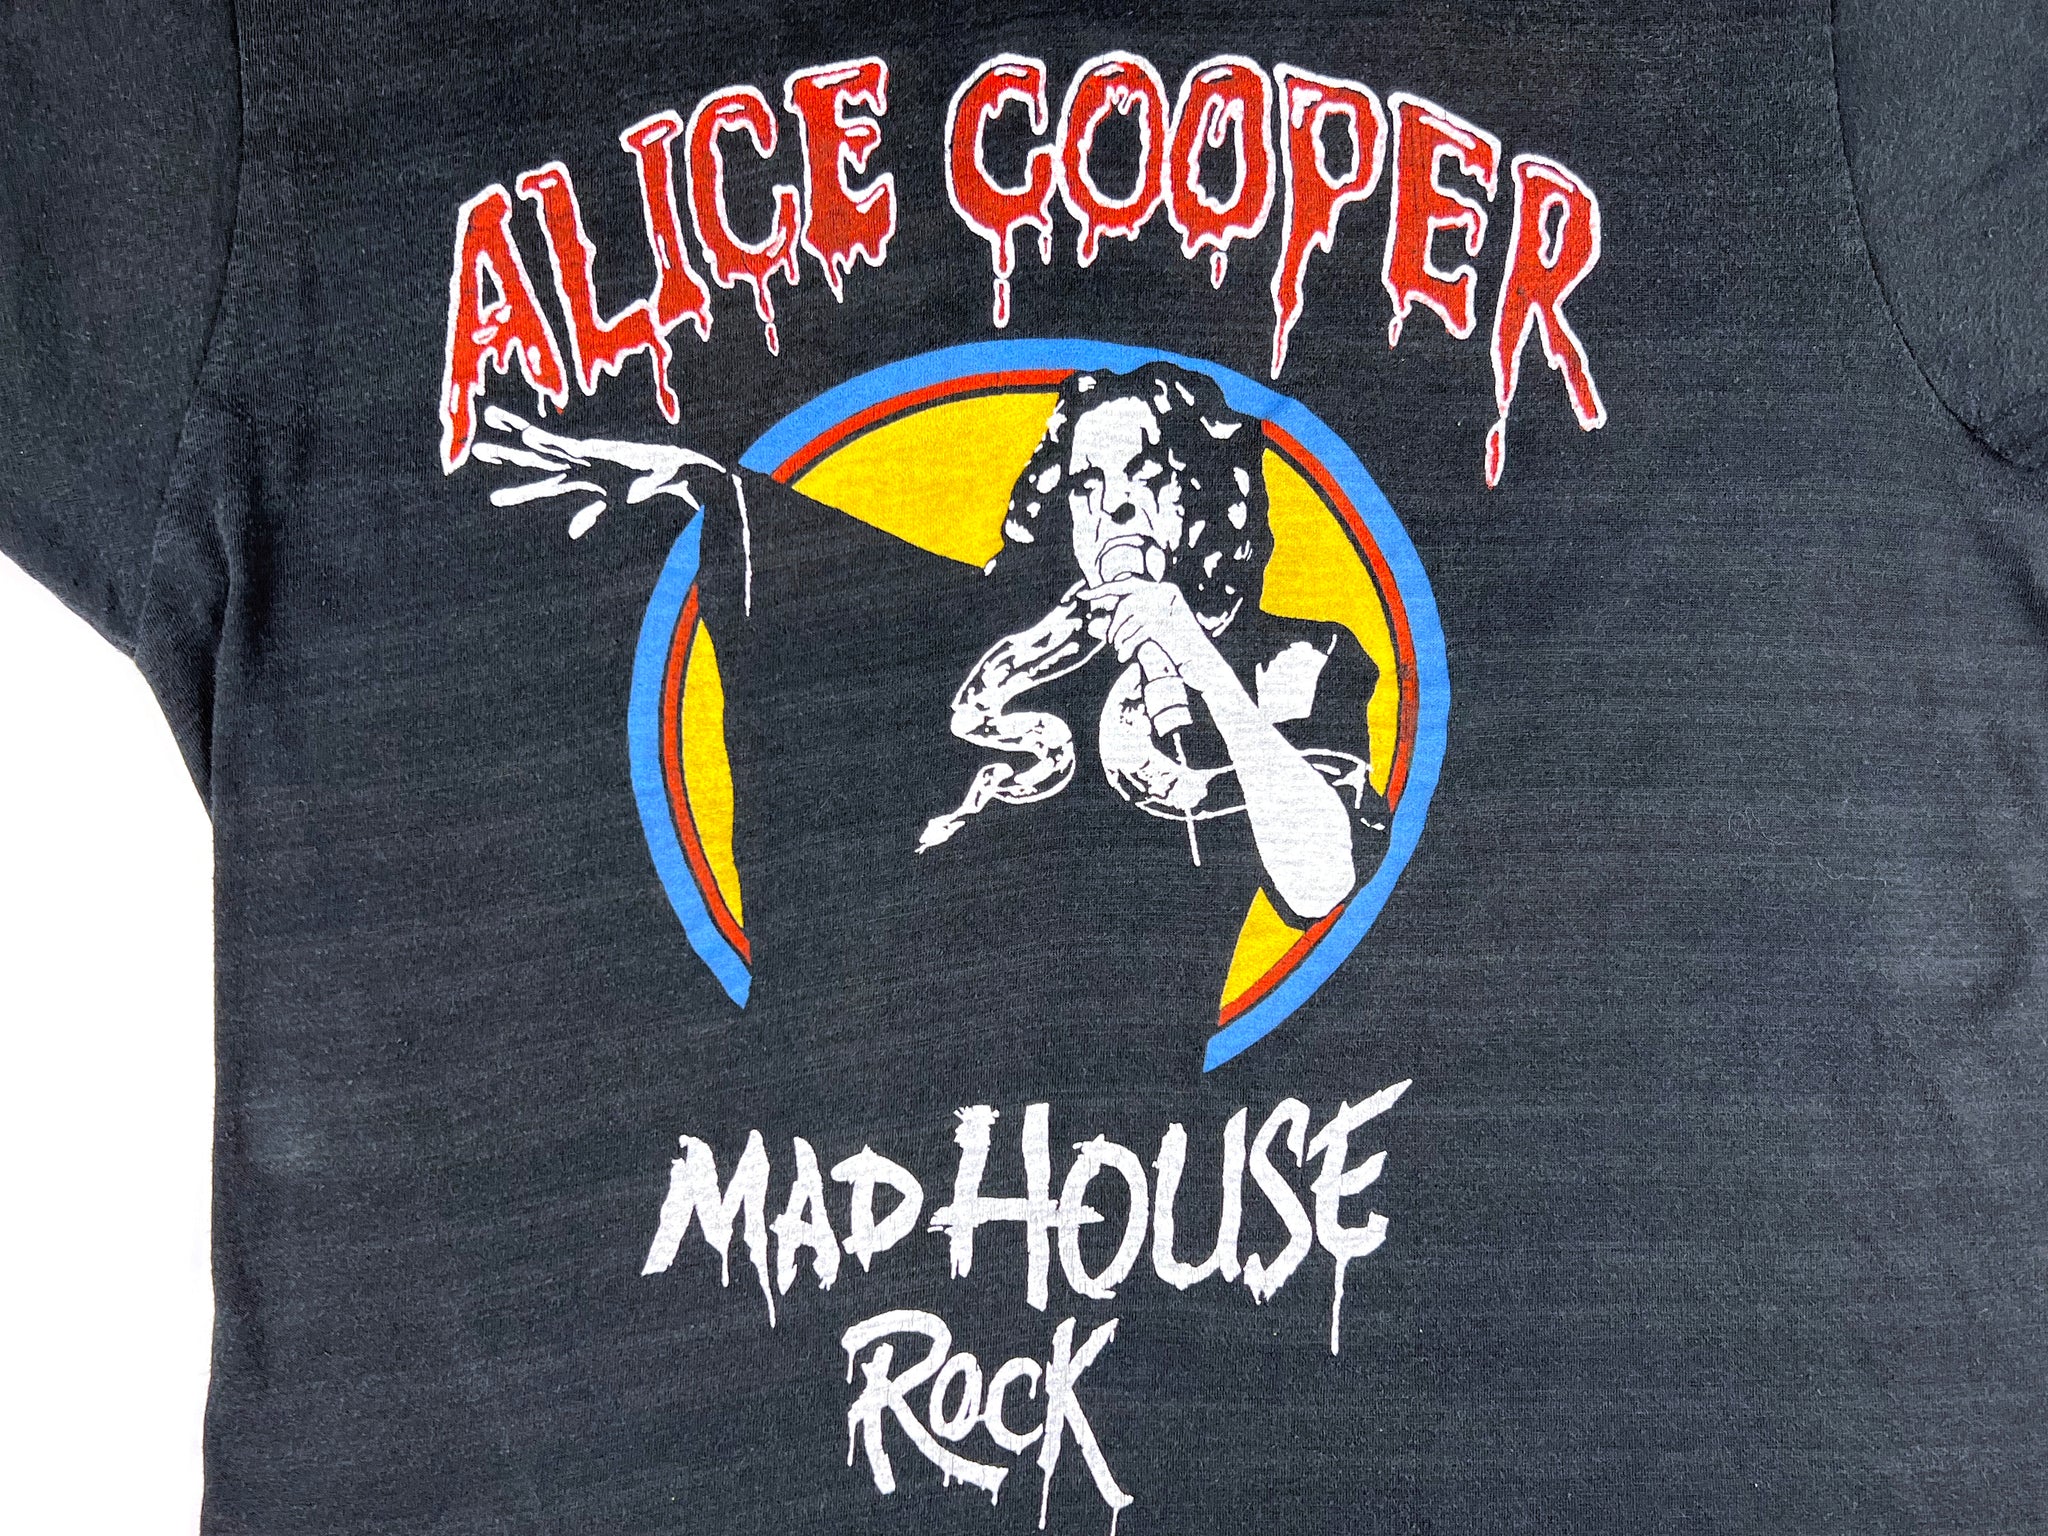 Alice Cooper 'Mad House Rock' 1979 Tour T-Shirt